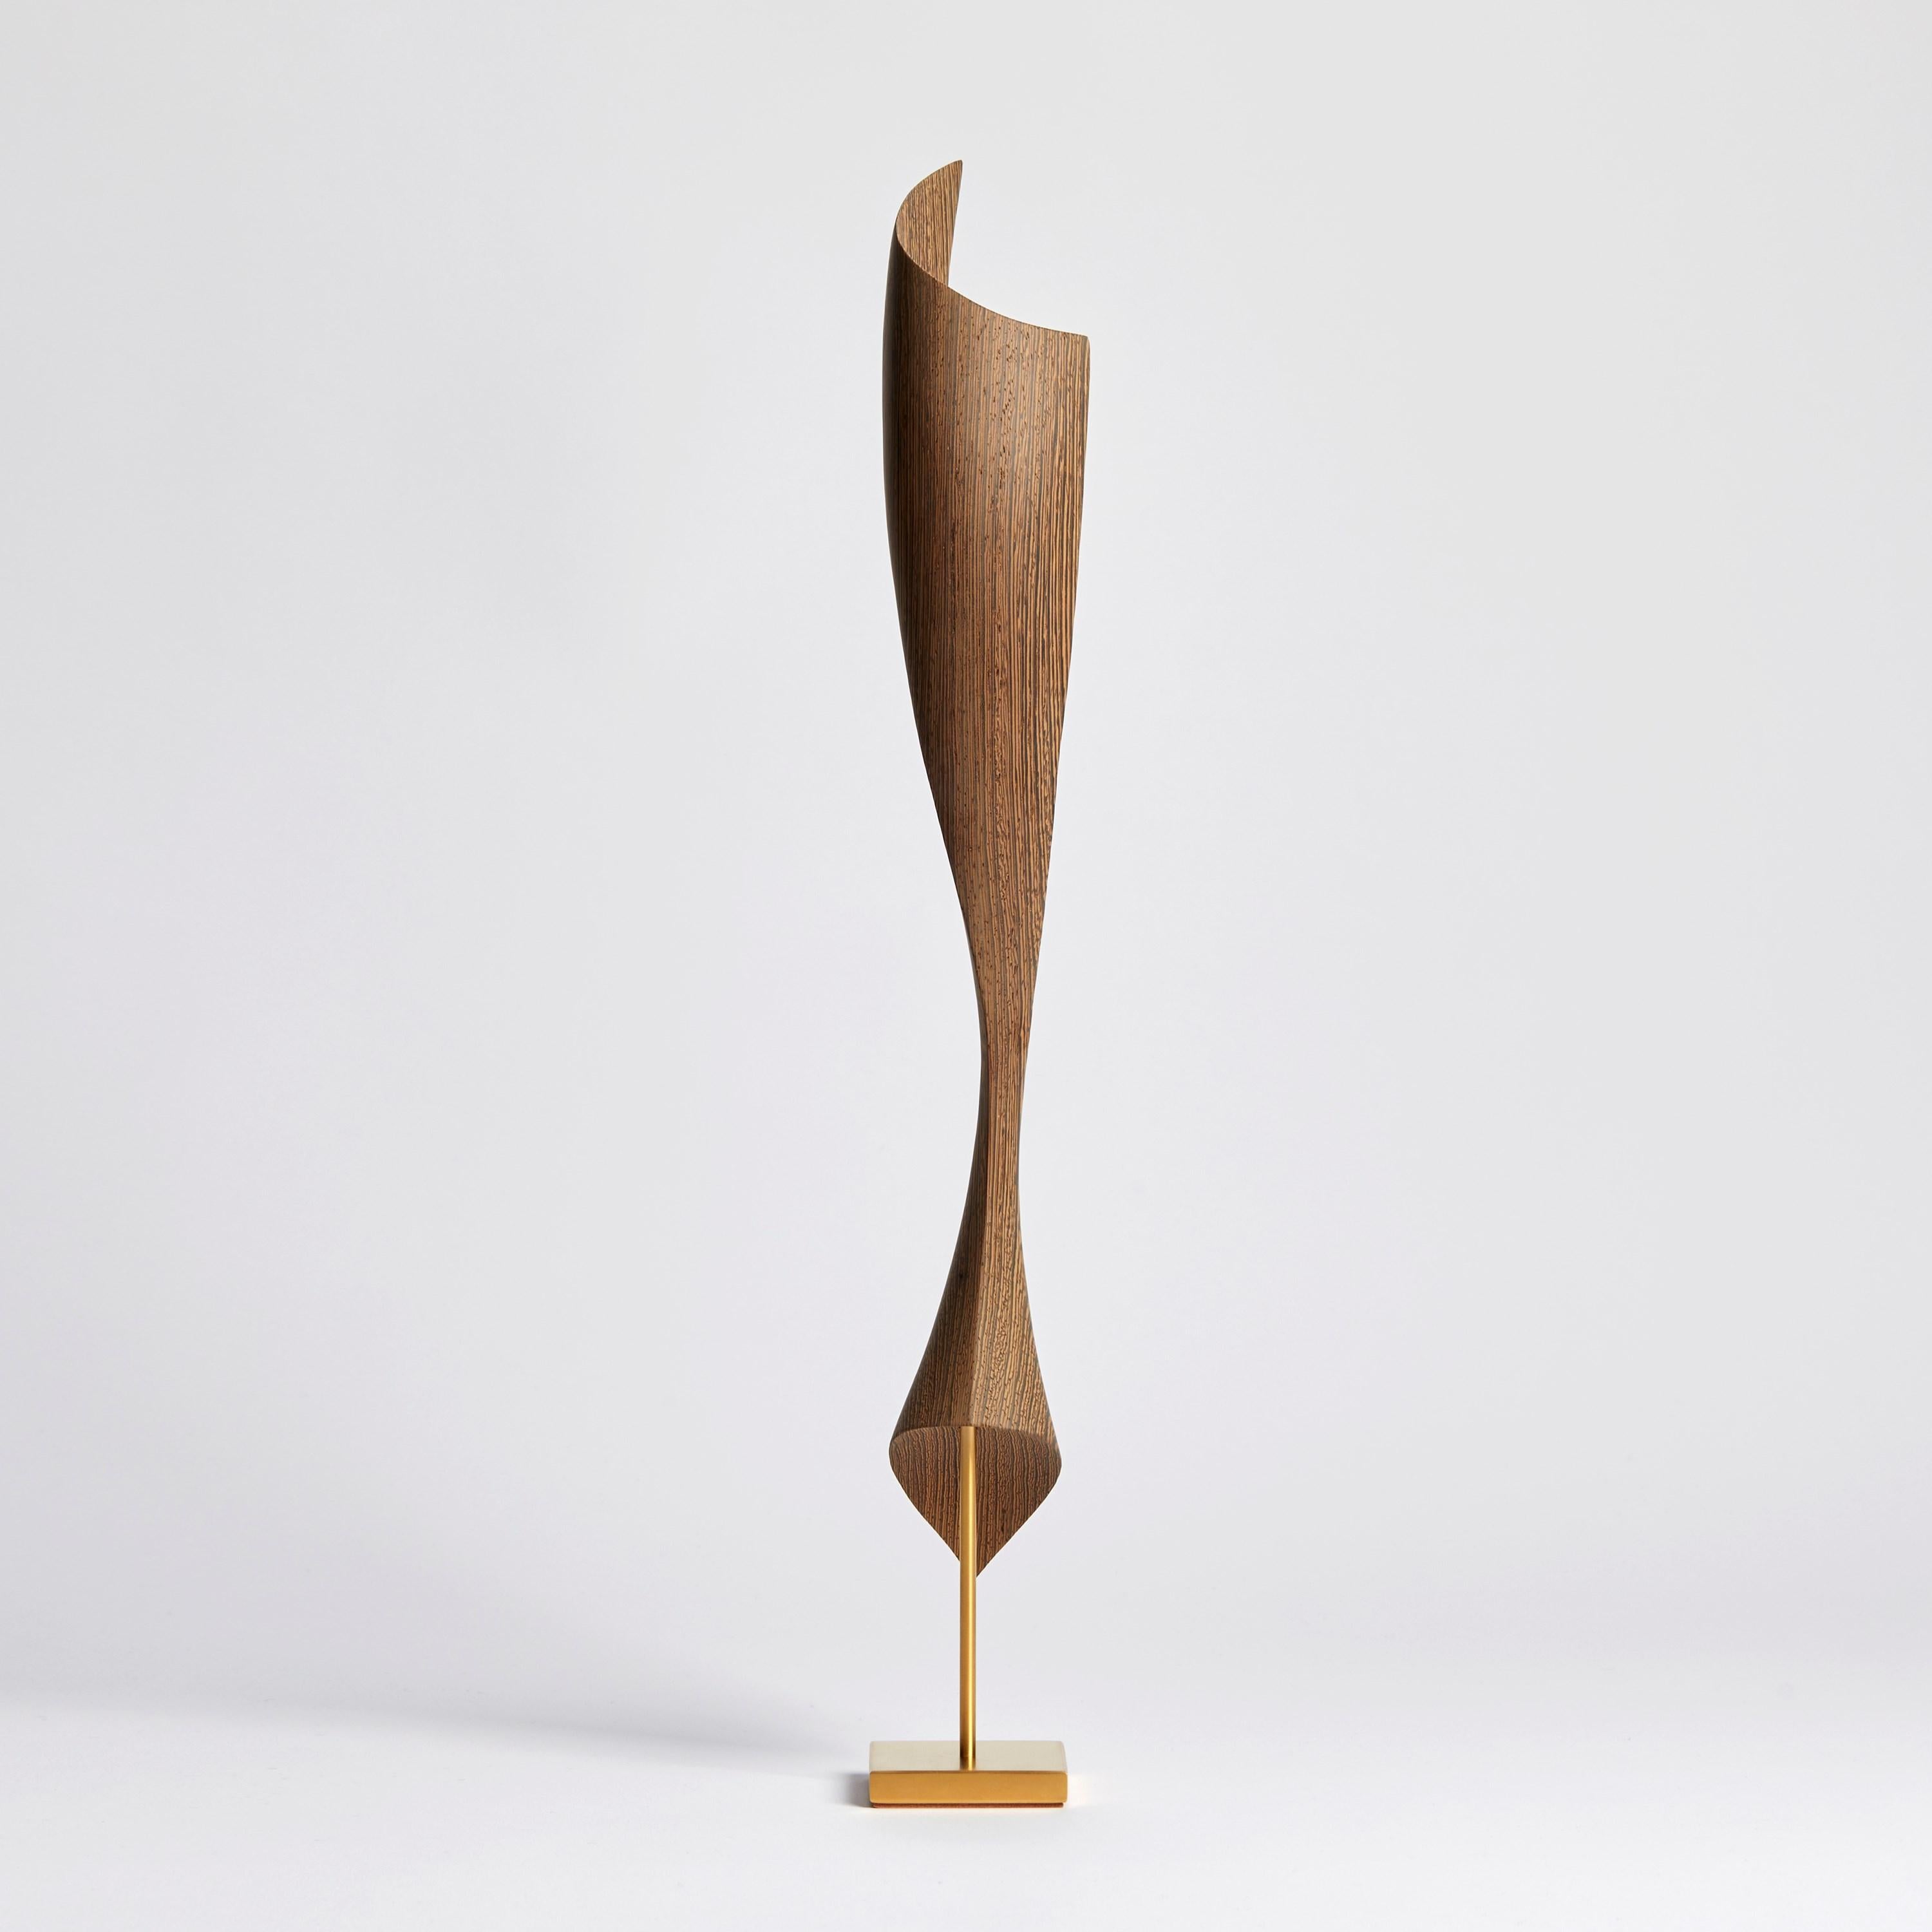 Hand-Crafted Flow Petit No 7, an Abstract Wood & Gold Sculpture by the Danish Studio Egeværk For Sale